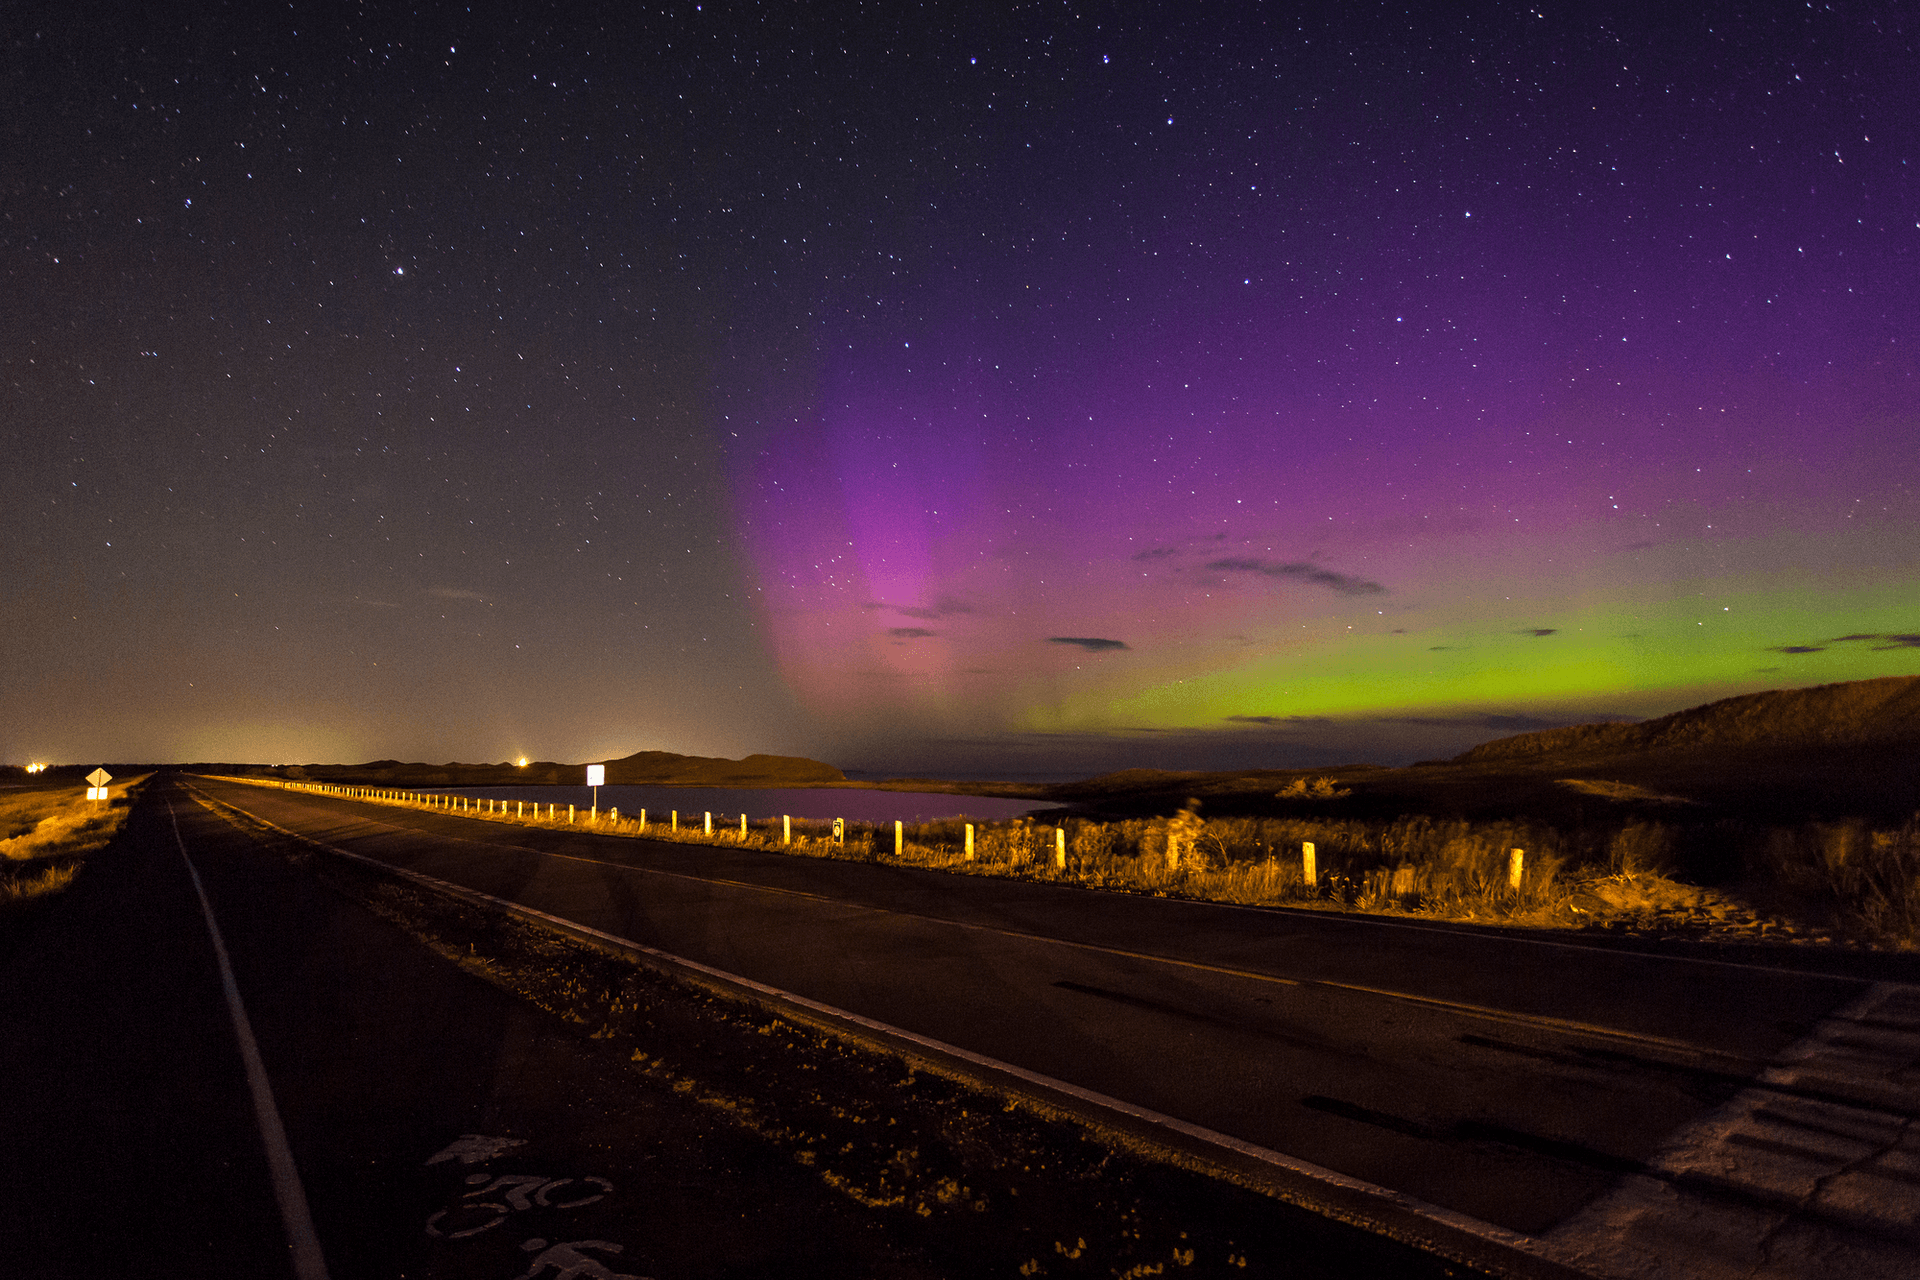 Purple and green northern lights in Prince Edward Island